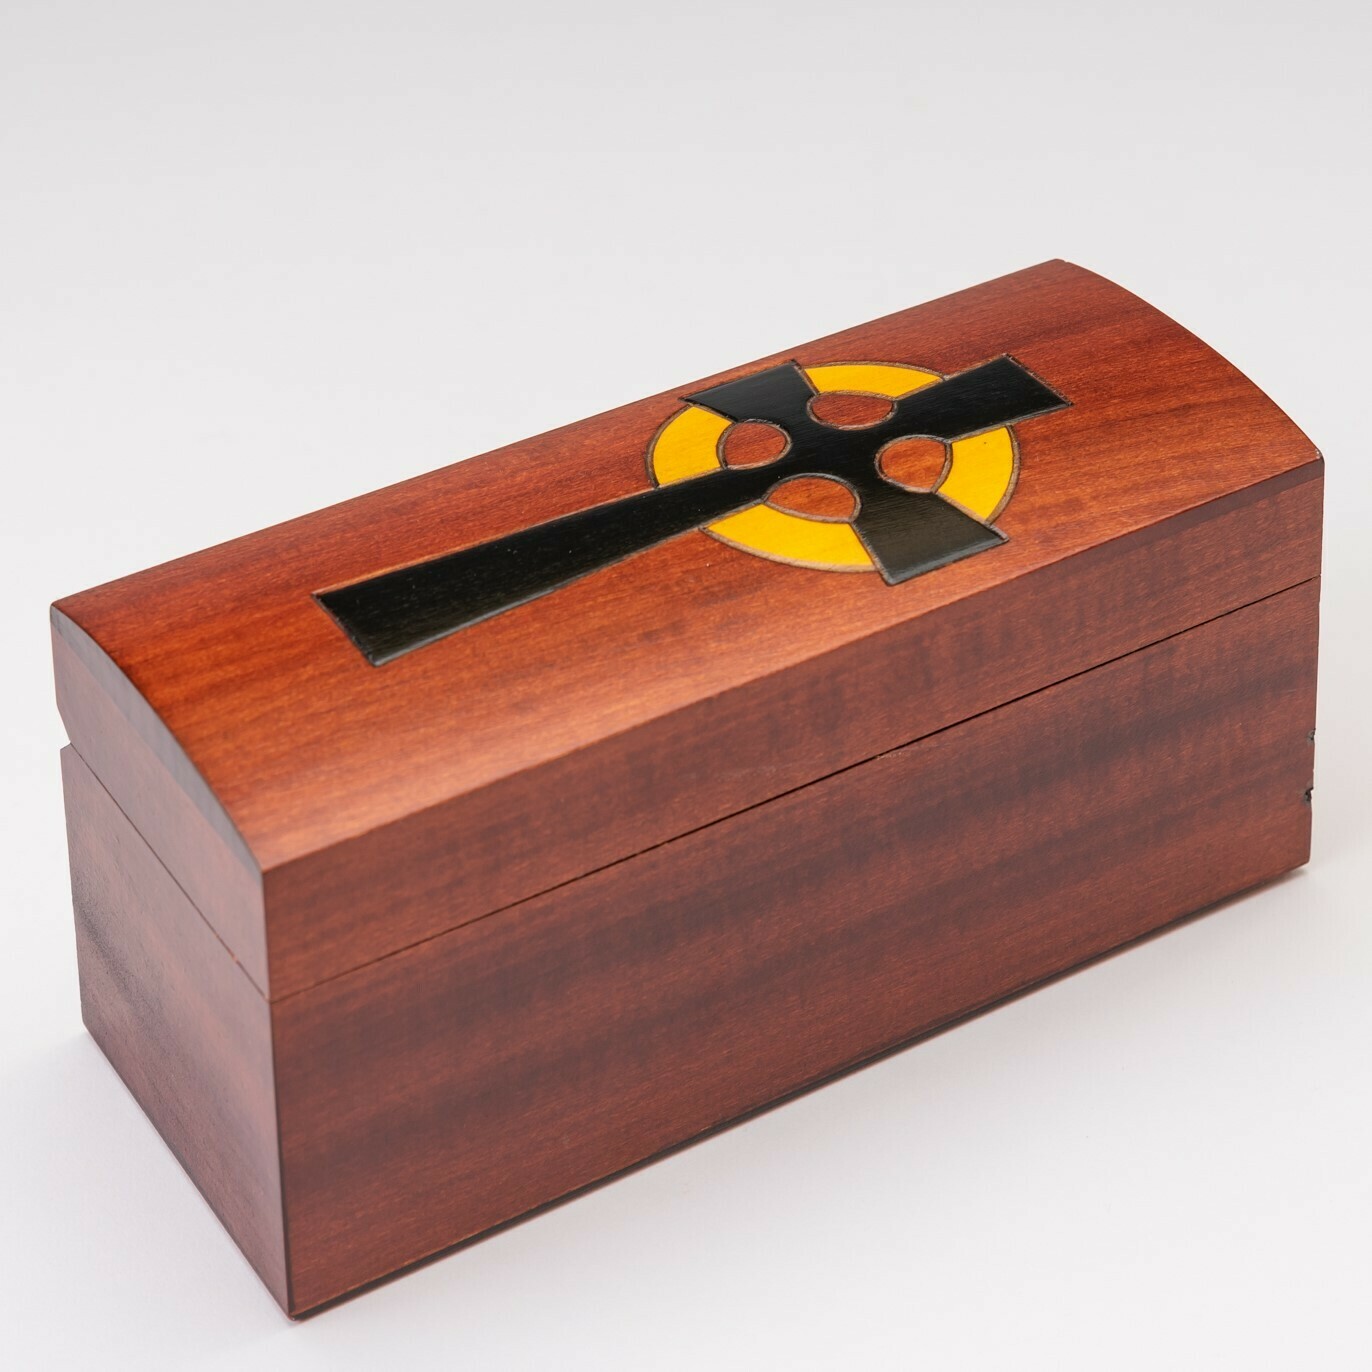 Cross Miscarriage Casket with Vessel C-7-CR